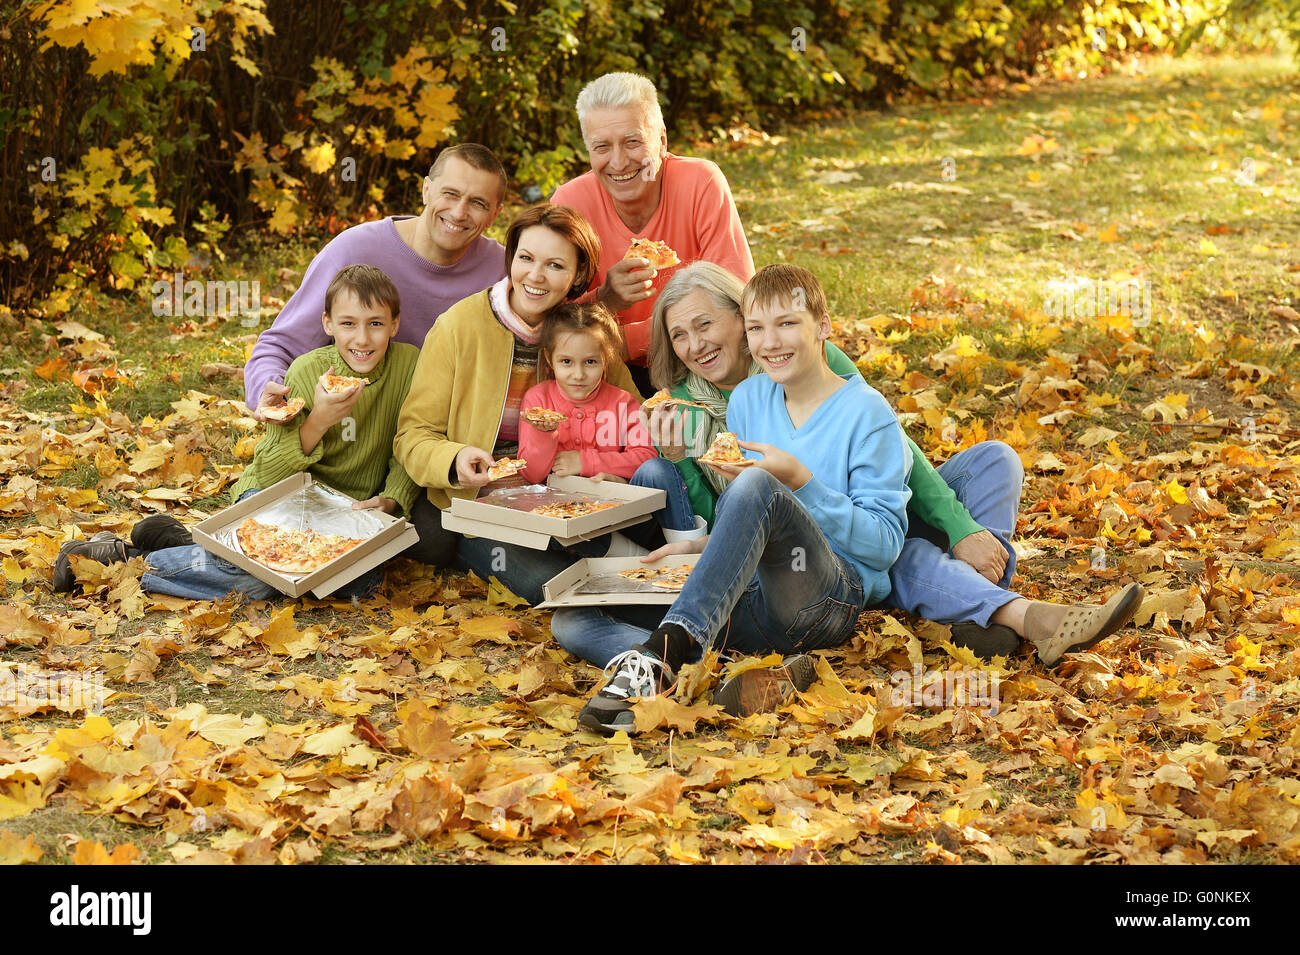 large family on a picnic Stock Photo